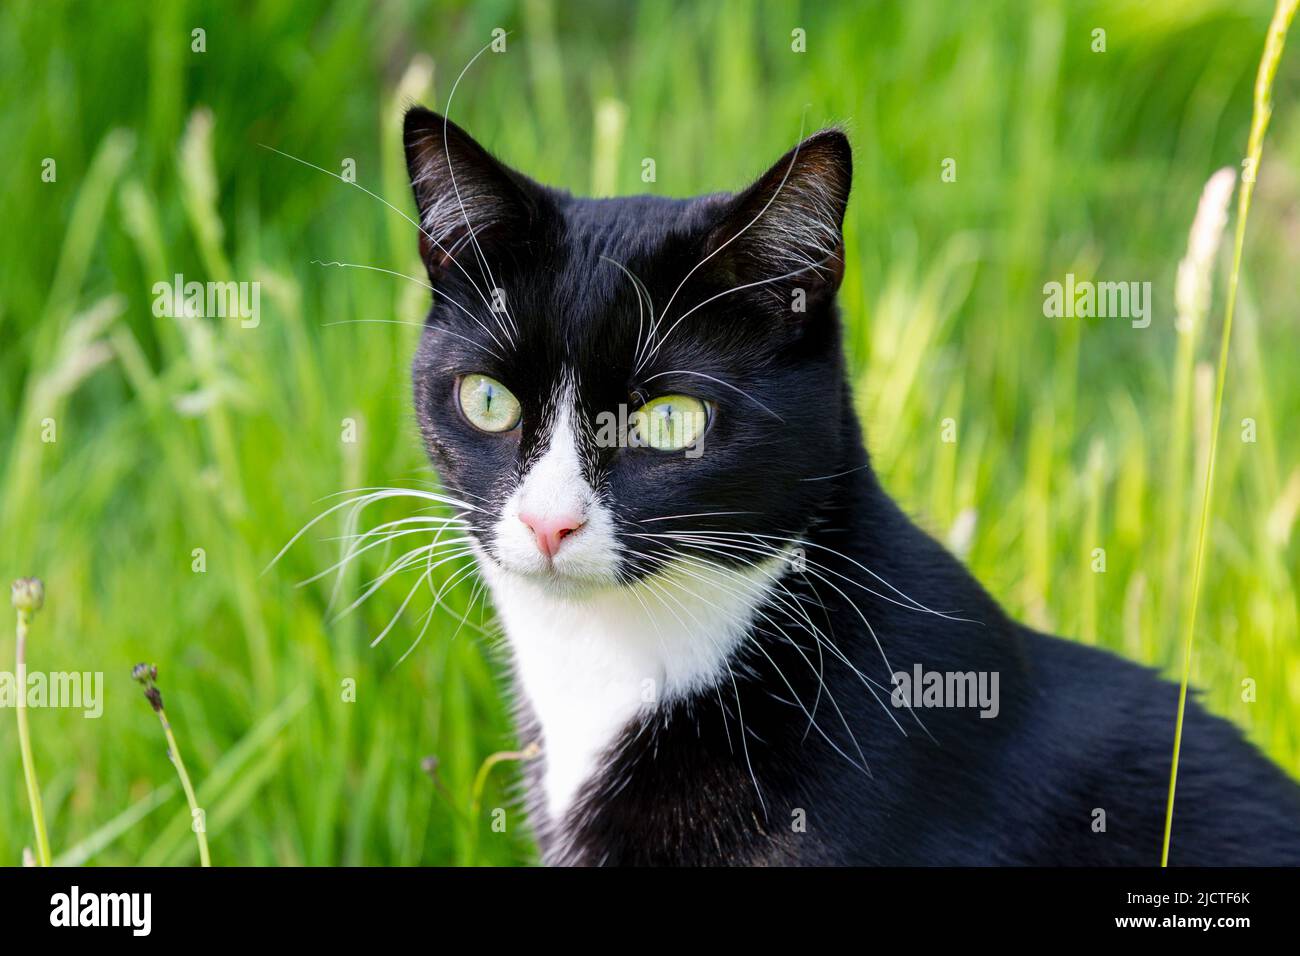 Black and white domestic short hair cat sitting in long grass Stock Photo